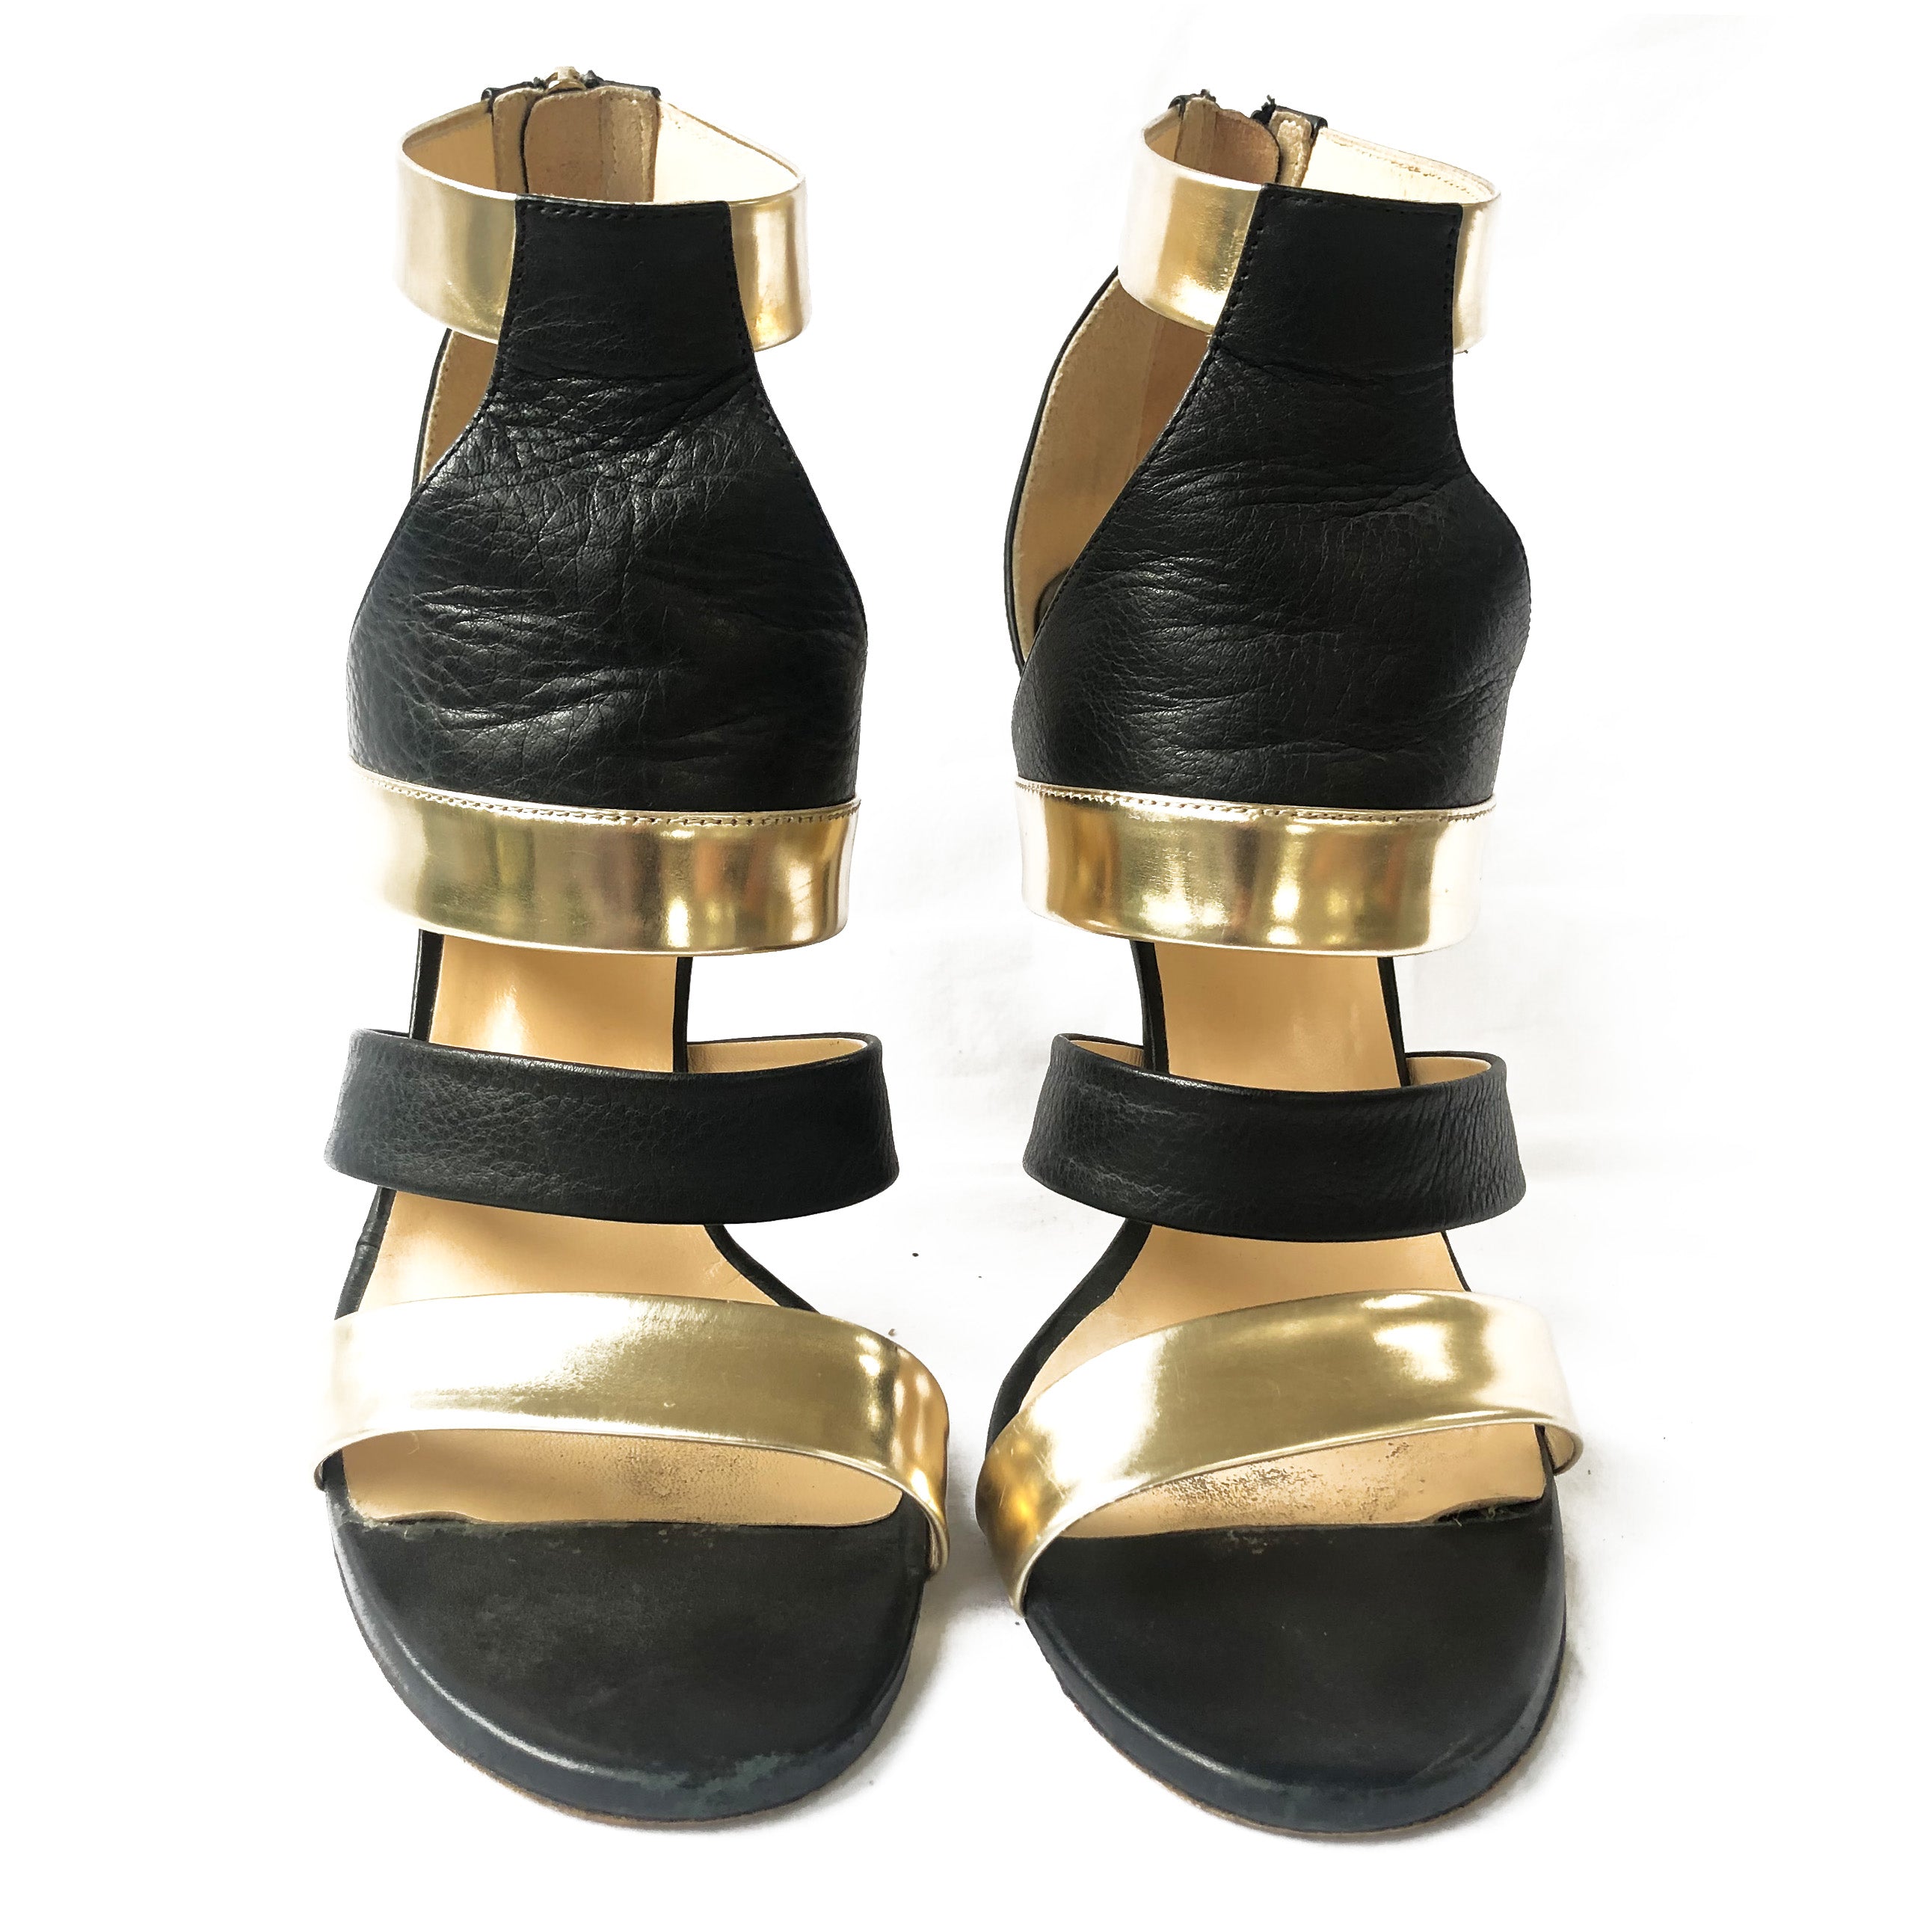 Metallic Sculptural Heeled Gold Strappy Sandals For Women 2023 Sexy Gold  High Heel Shoes With Glamorous PU Leather Straps From Dresscools, $29.52 |  DHgate.Com